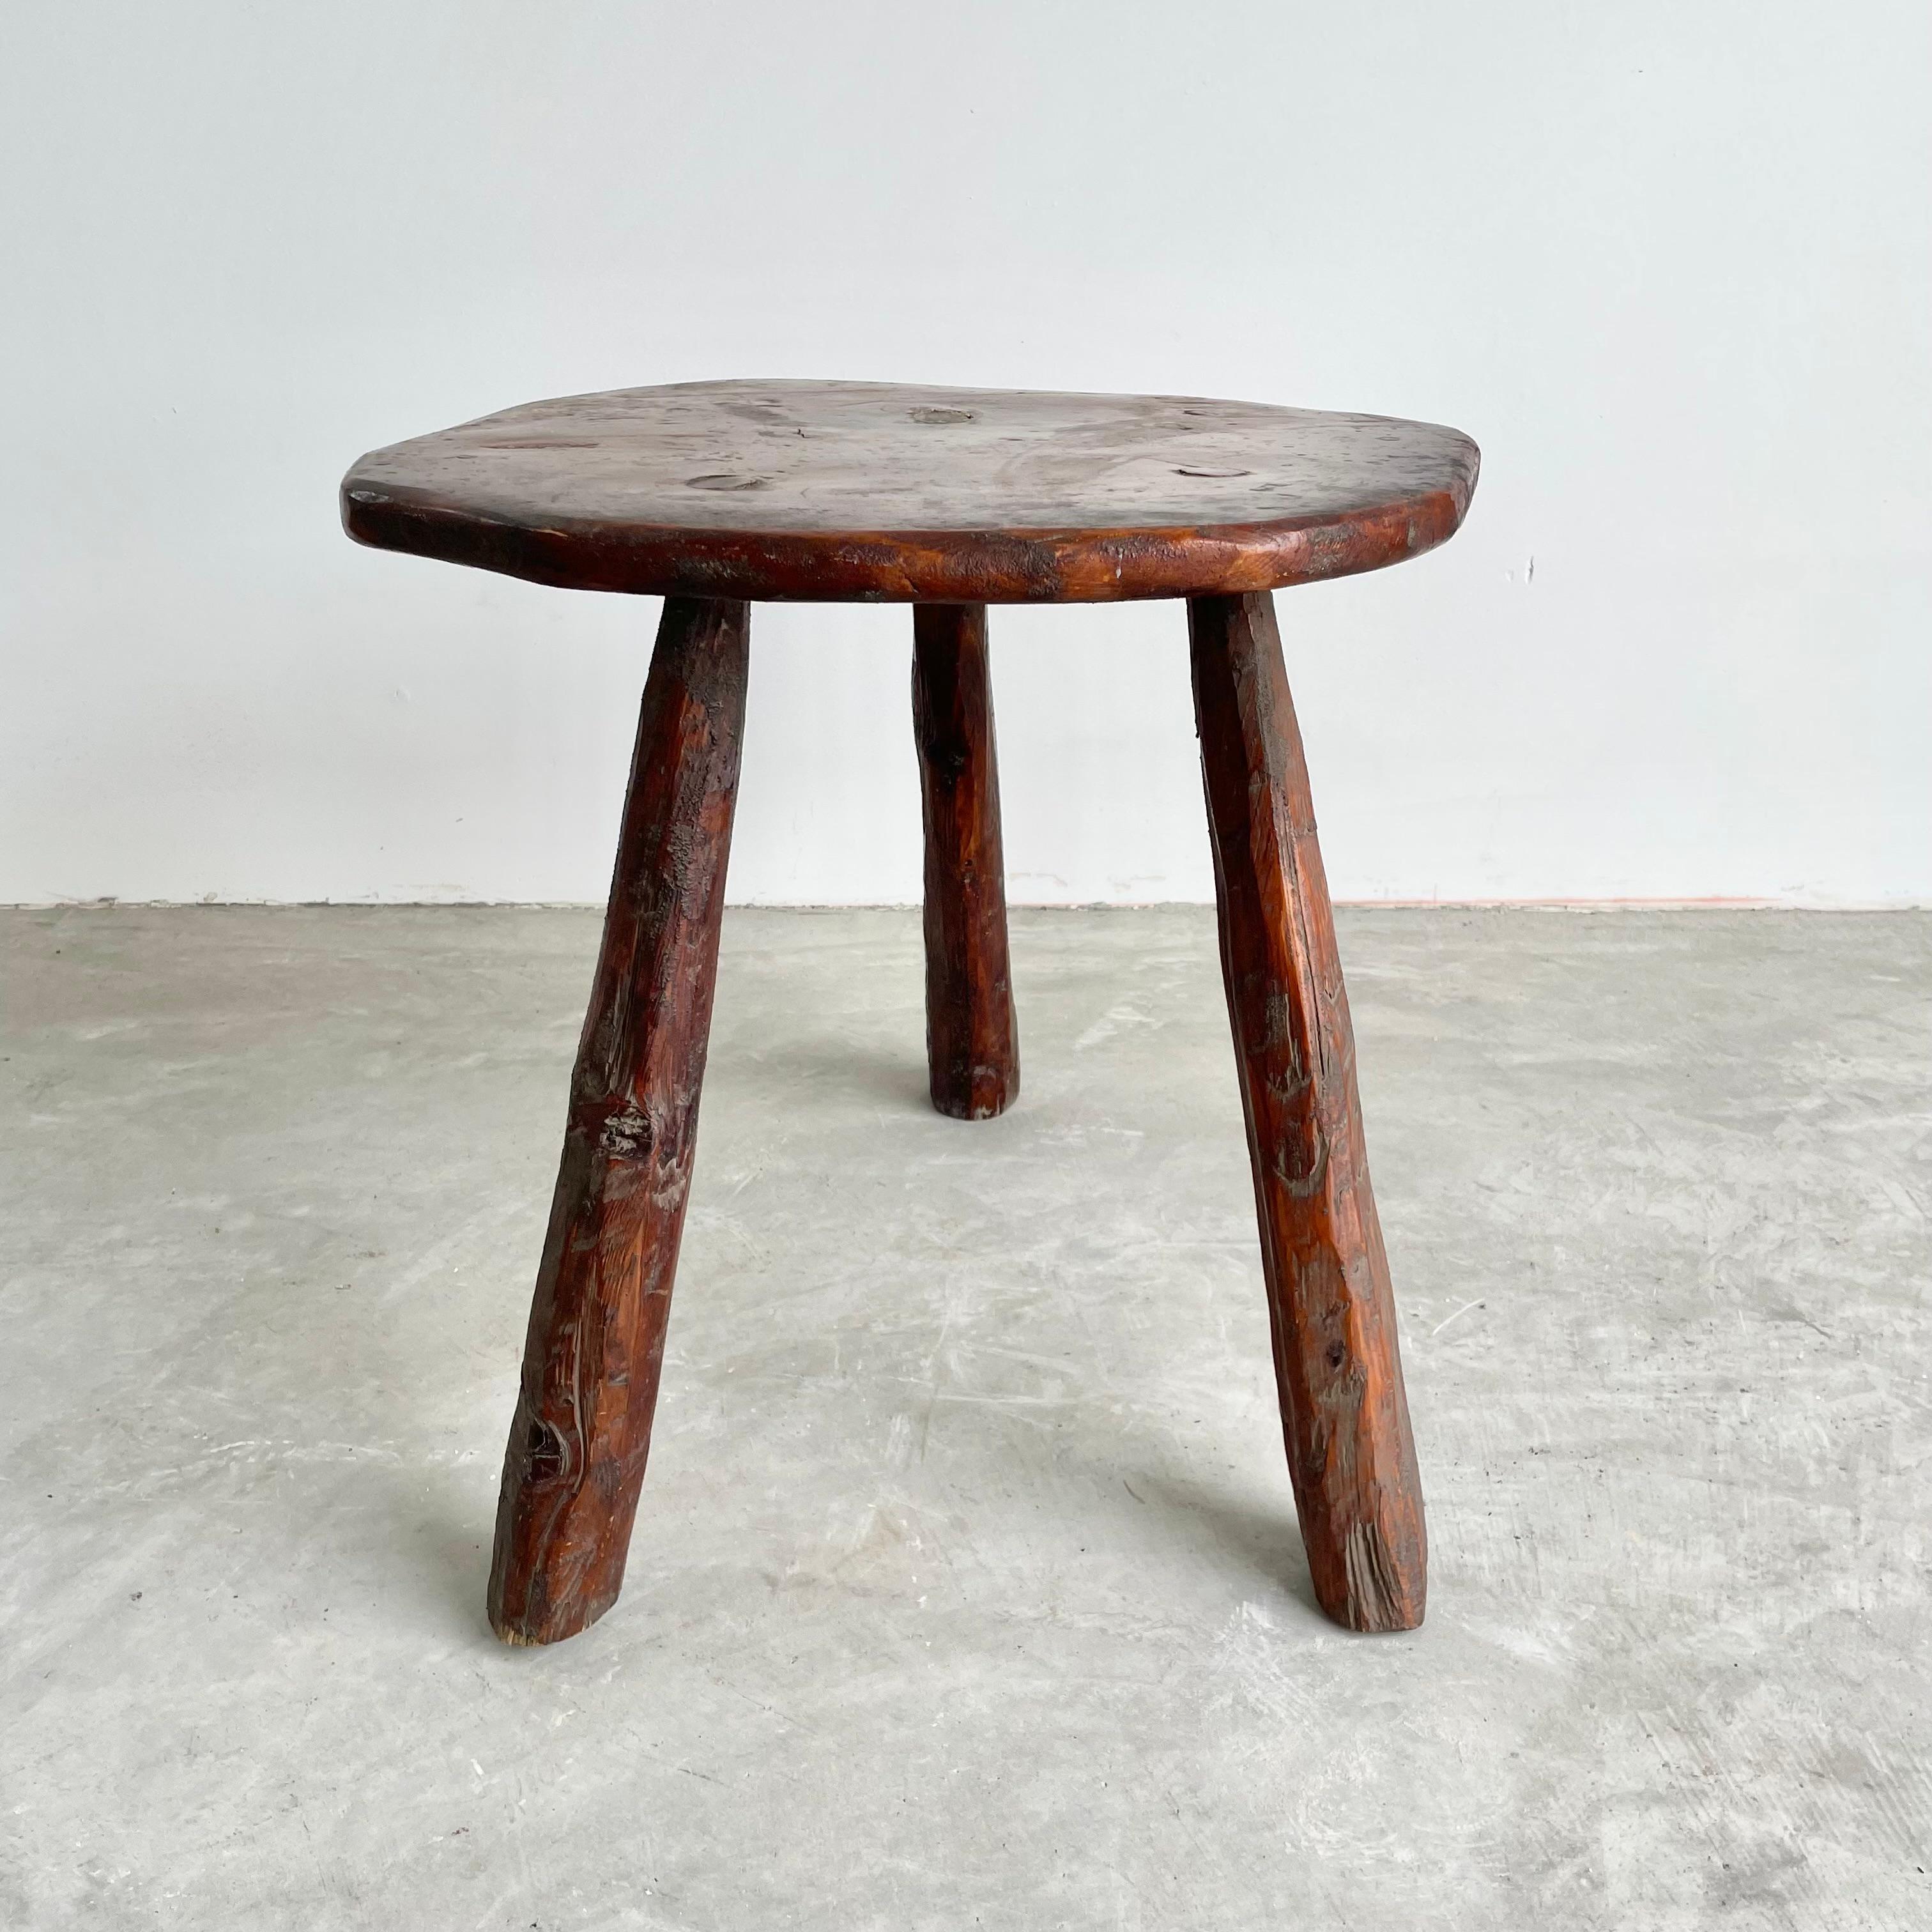 Oversized, chunky wood stool made in France, circa 1960s. Large raw edge seat with three thick club legs. Substantial stool with great lines and posture. Darkened patina and grain to the wood. Perfect for books or objects.
 